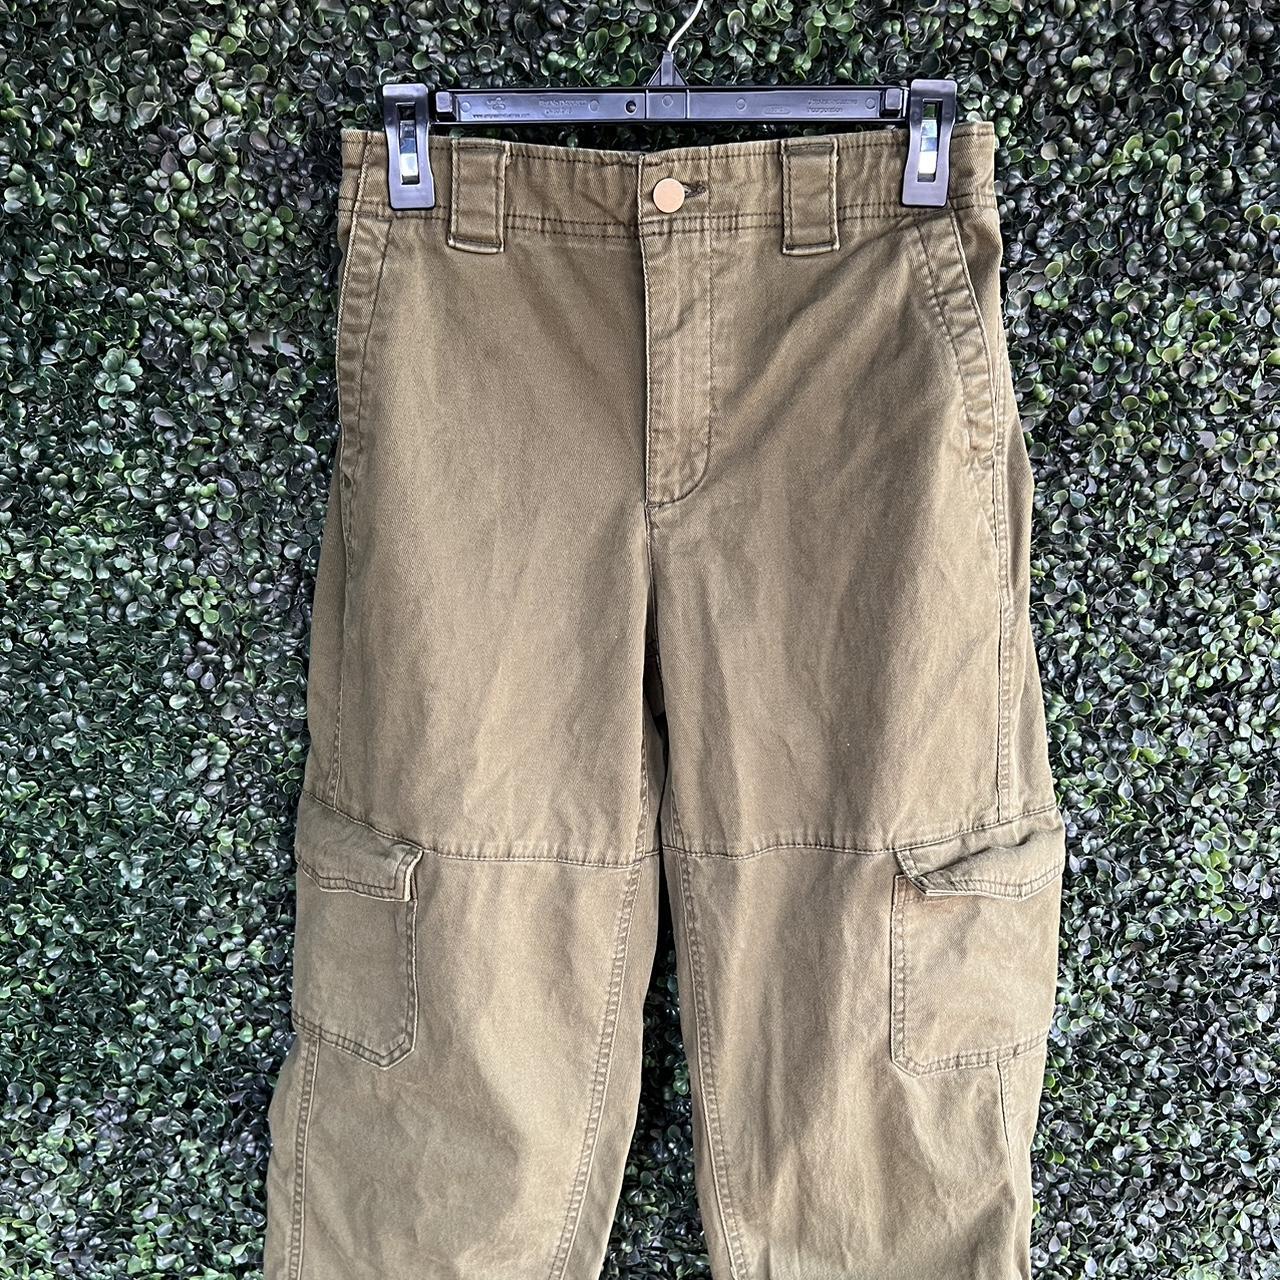 green sinched cargo pants - Depop